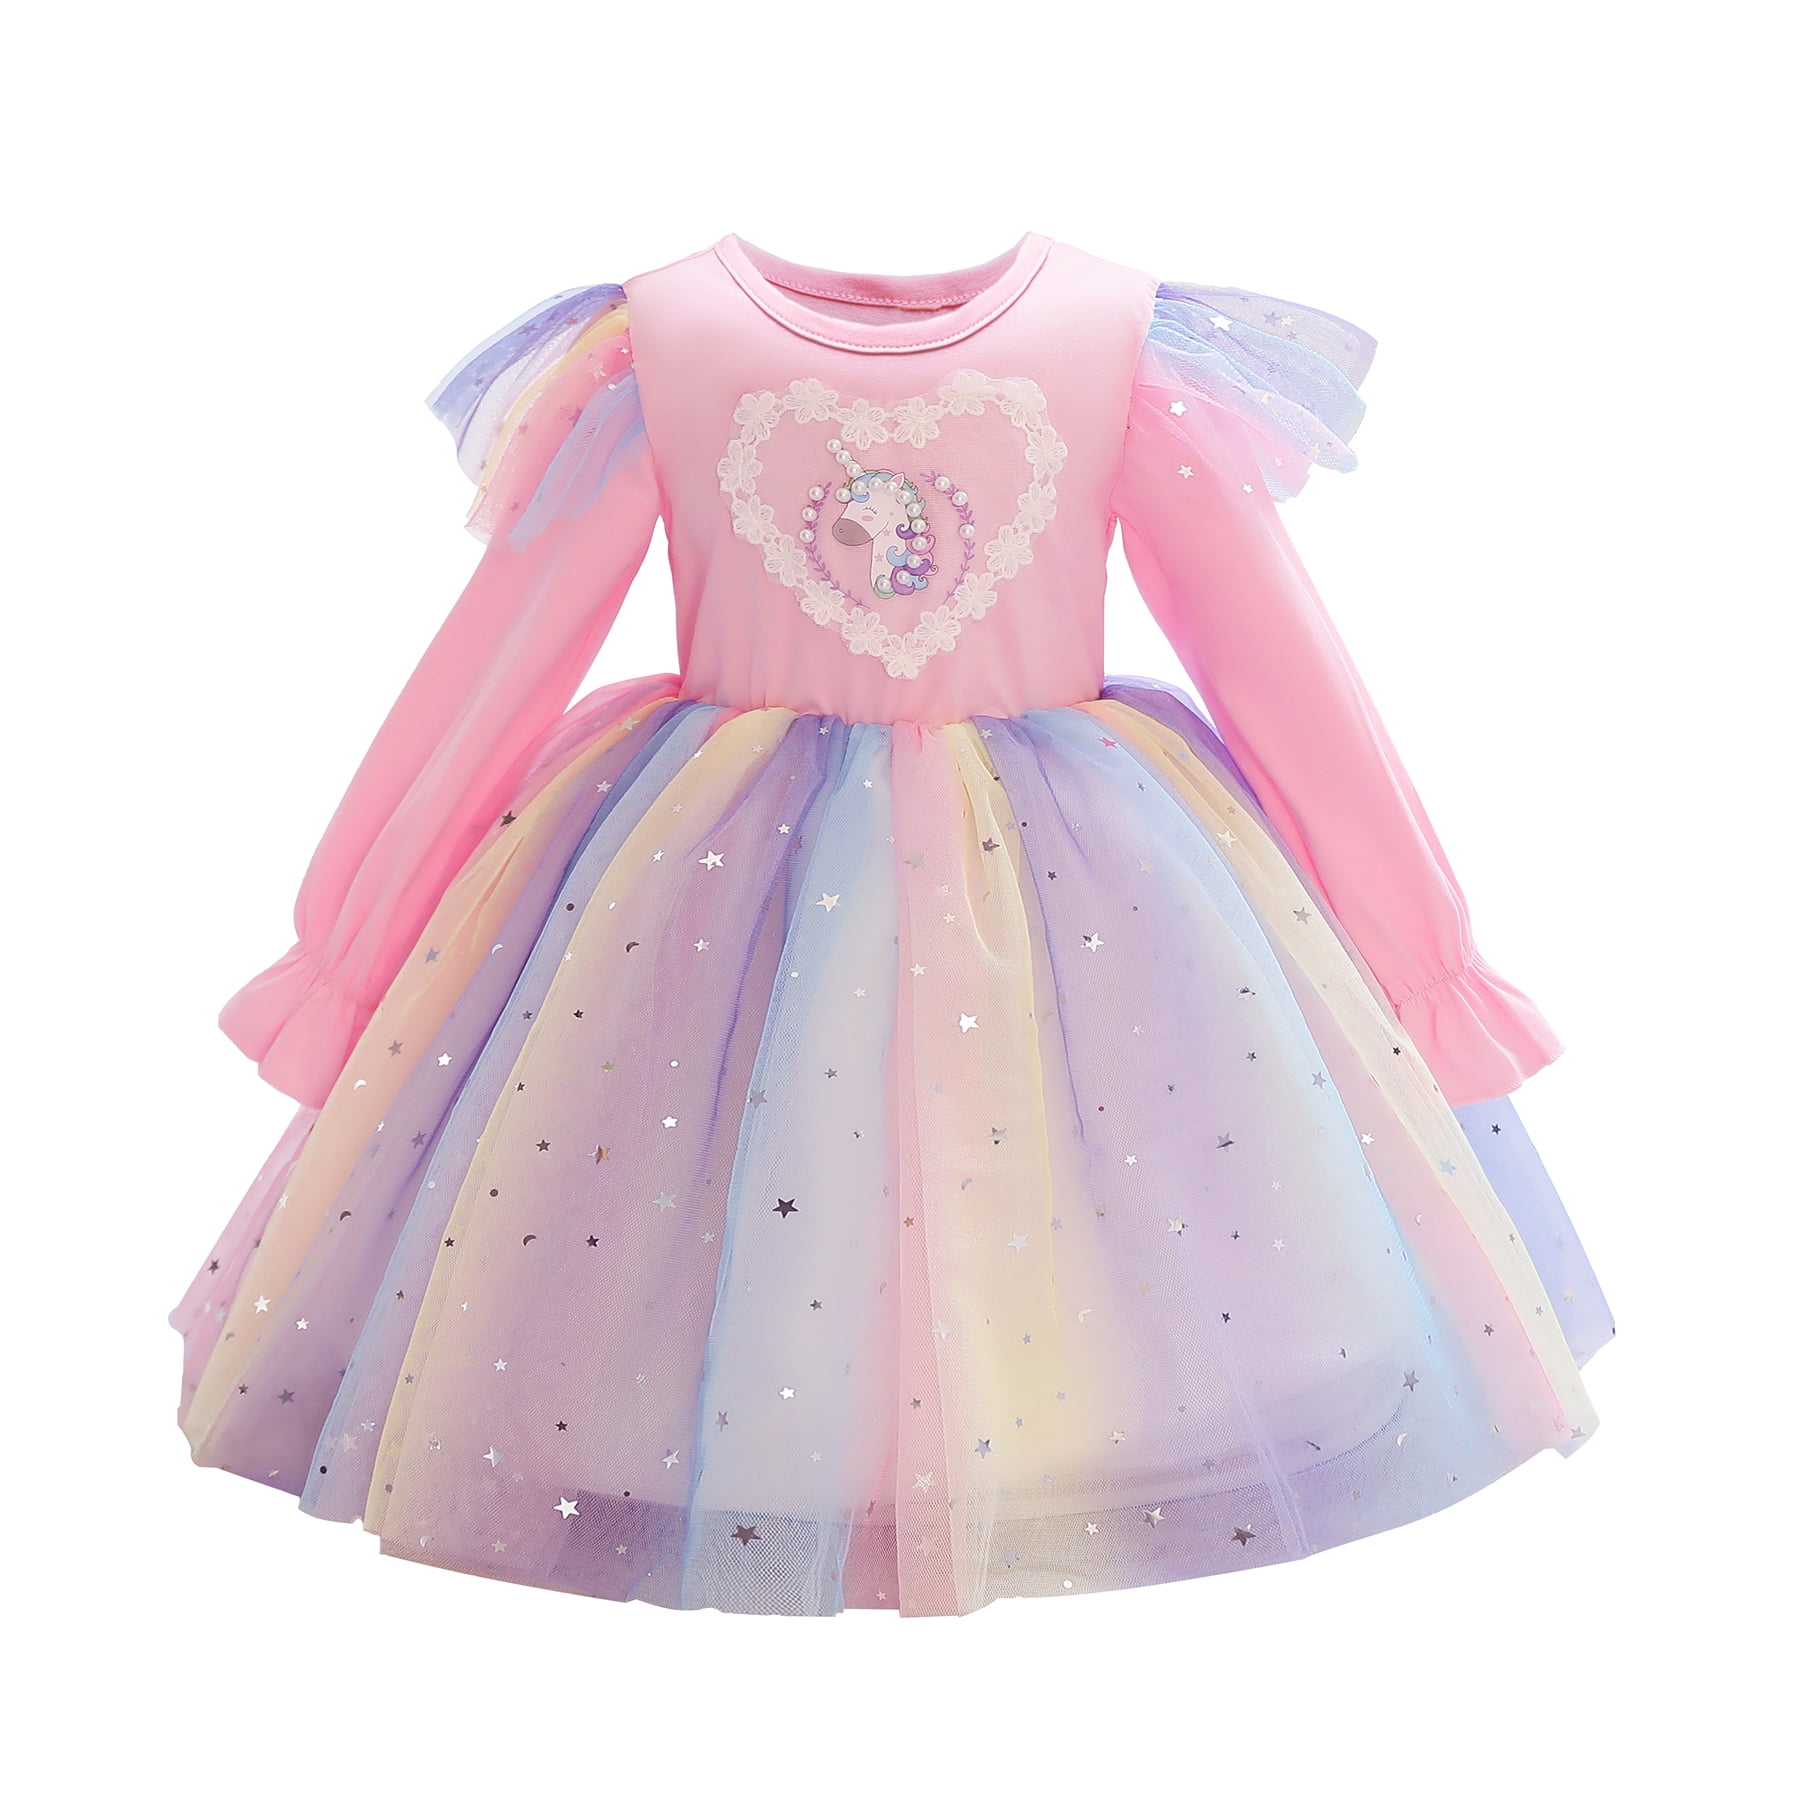 occasion dress age 2/3 | in Eastleigh, Hampshire | Gumtree